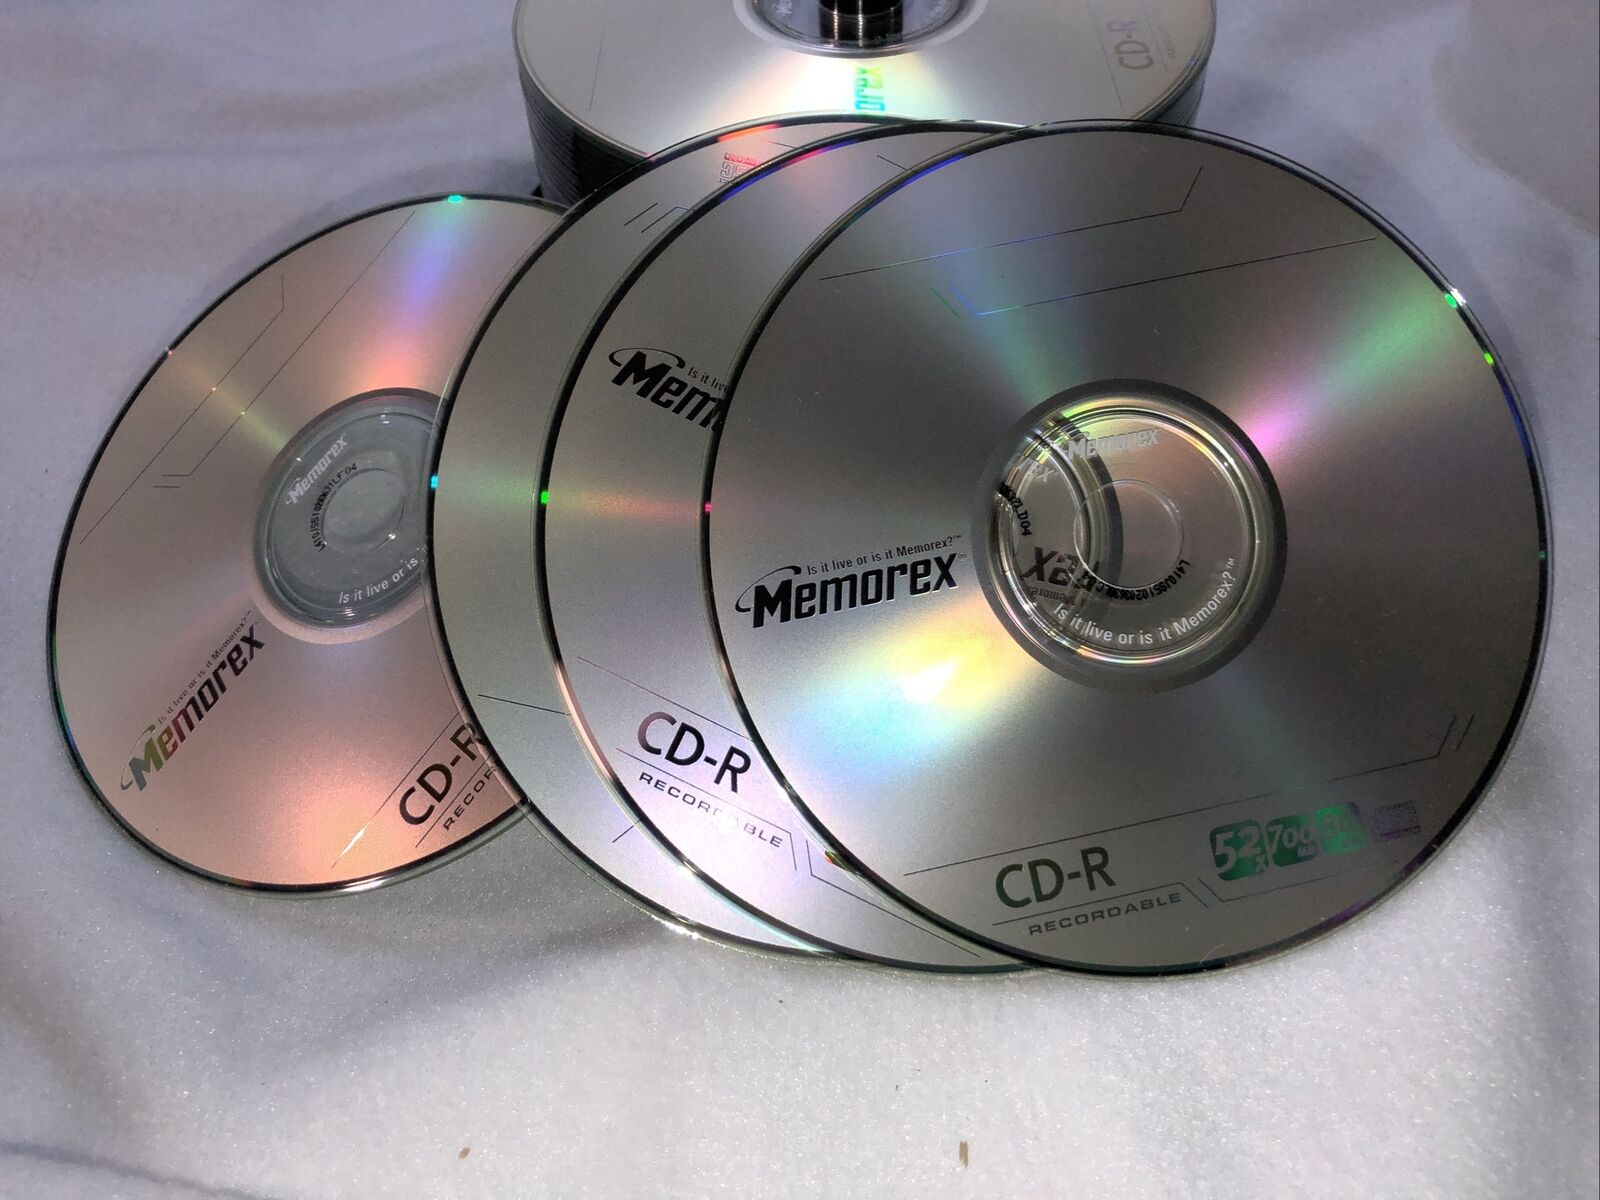 Memorex blank recordable CD’s  41 qty. 52x/700MB/80MIN.  New In Open Box.